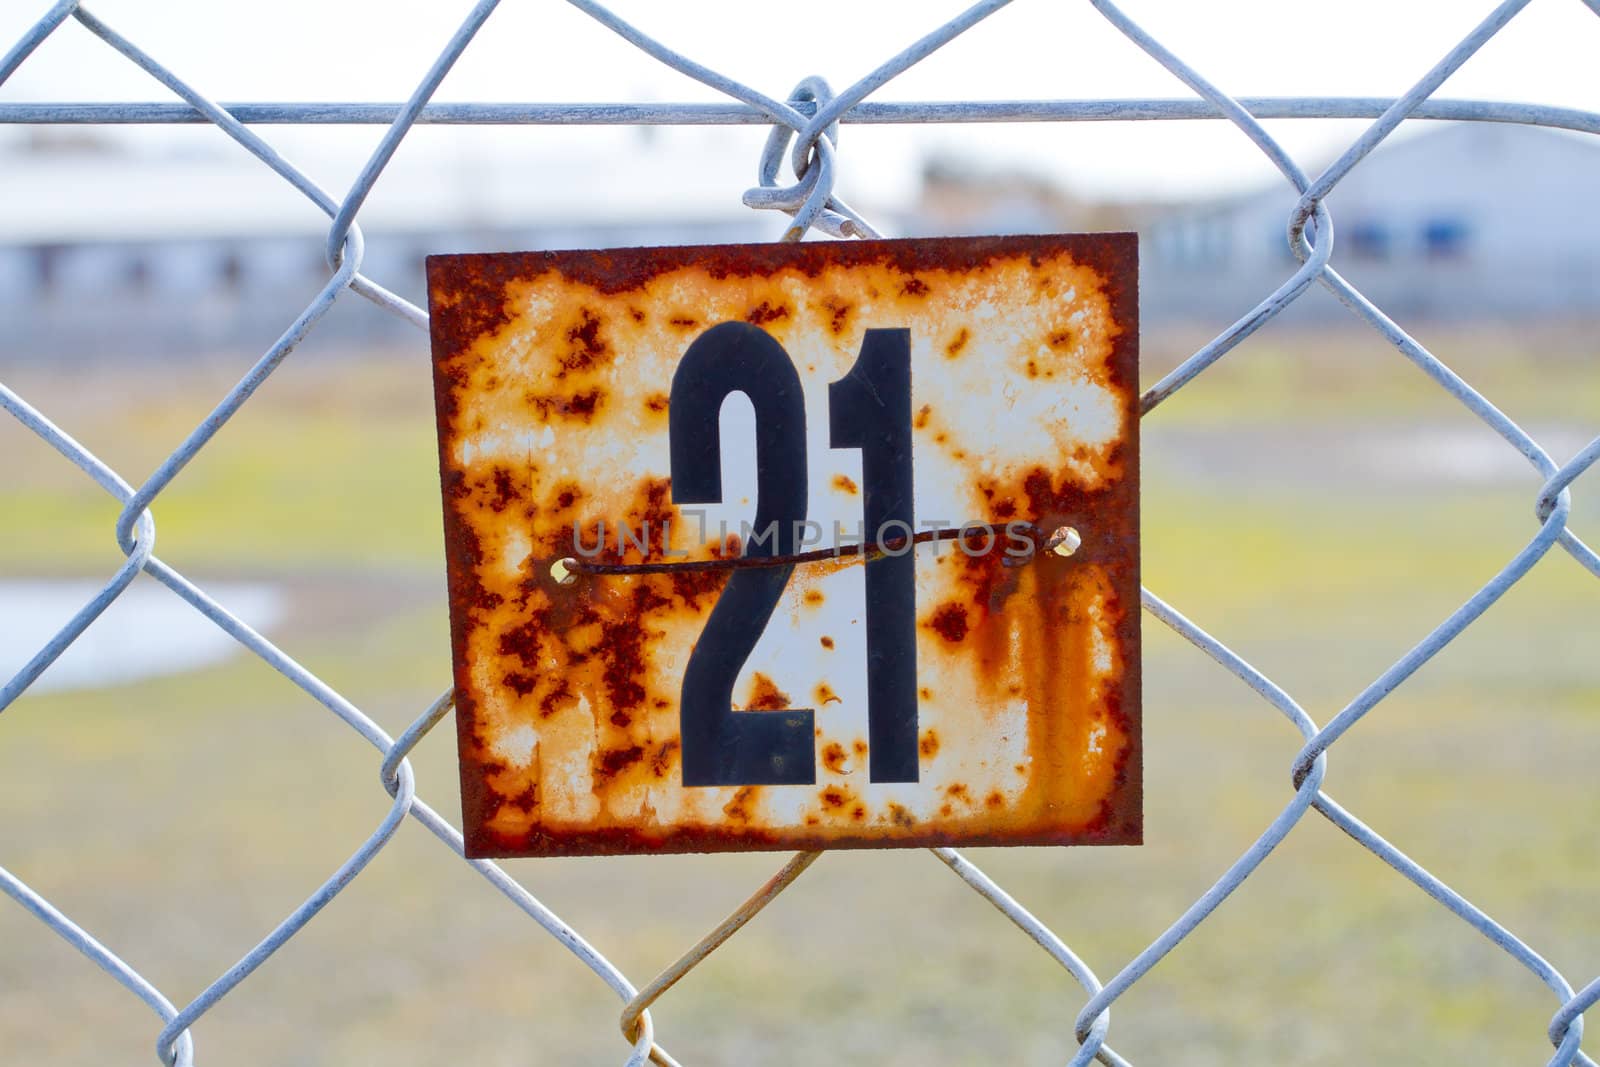 A series of rusted old signs or tags are attached to this chain link fence with orange and white rust and the numbers clearly visible.